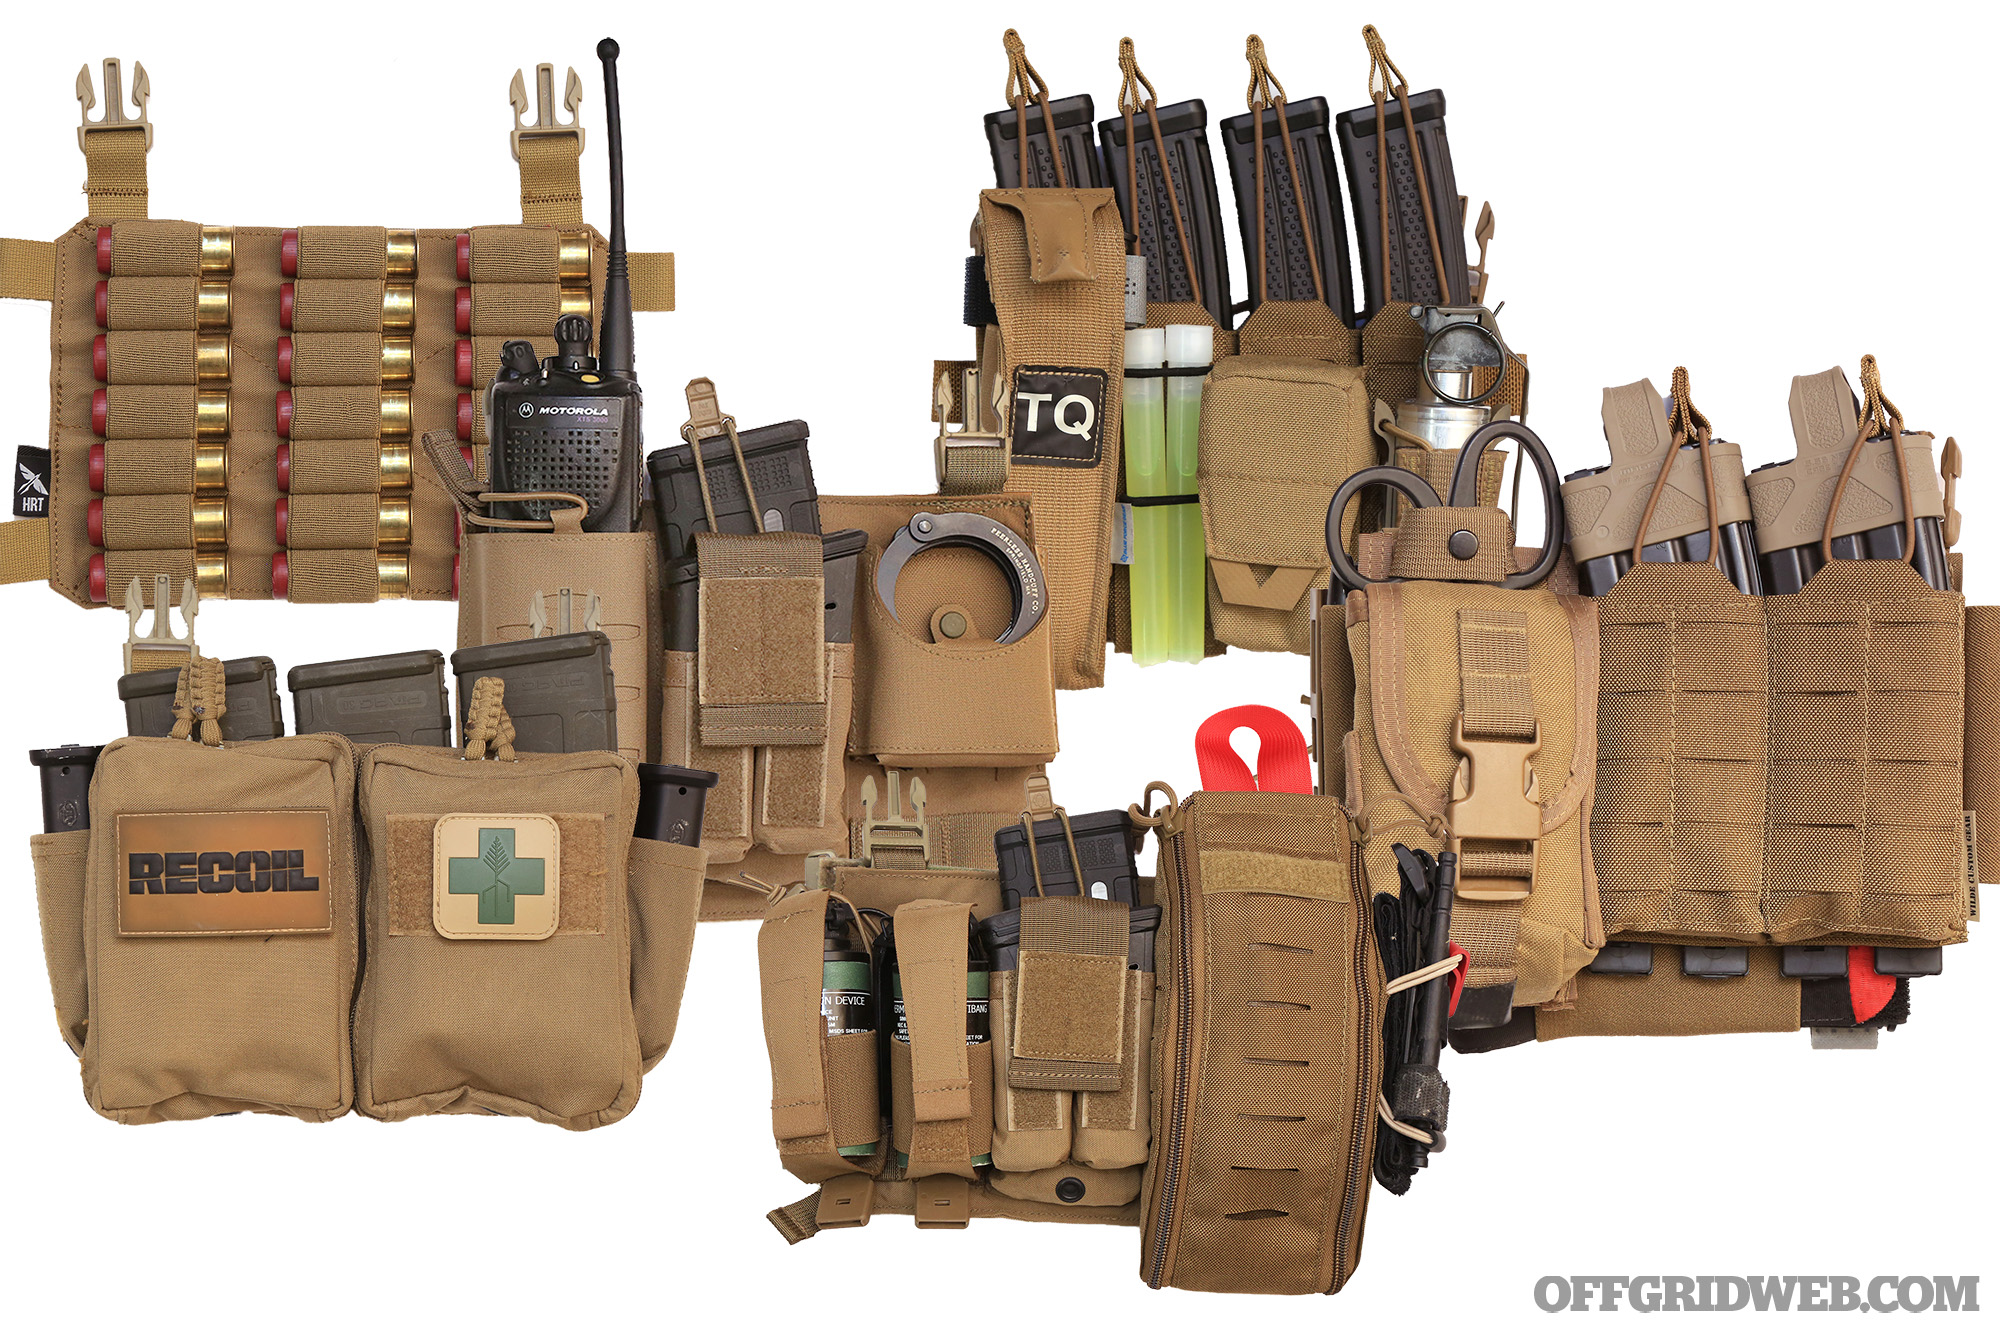 Tactical Placard System for Plate Carriers